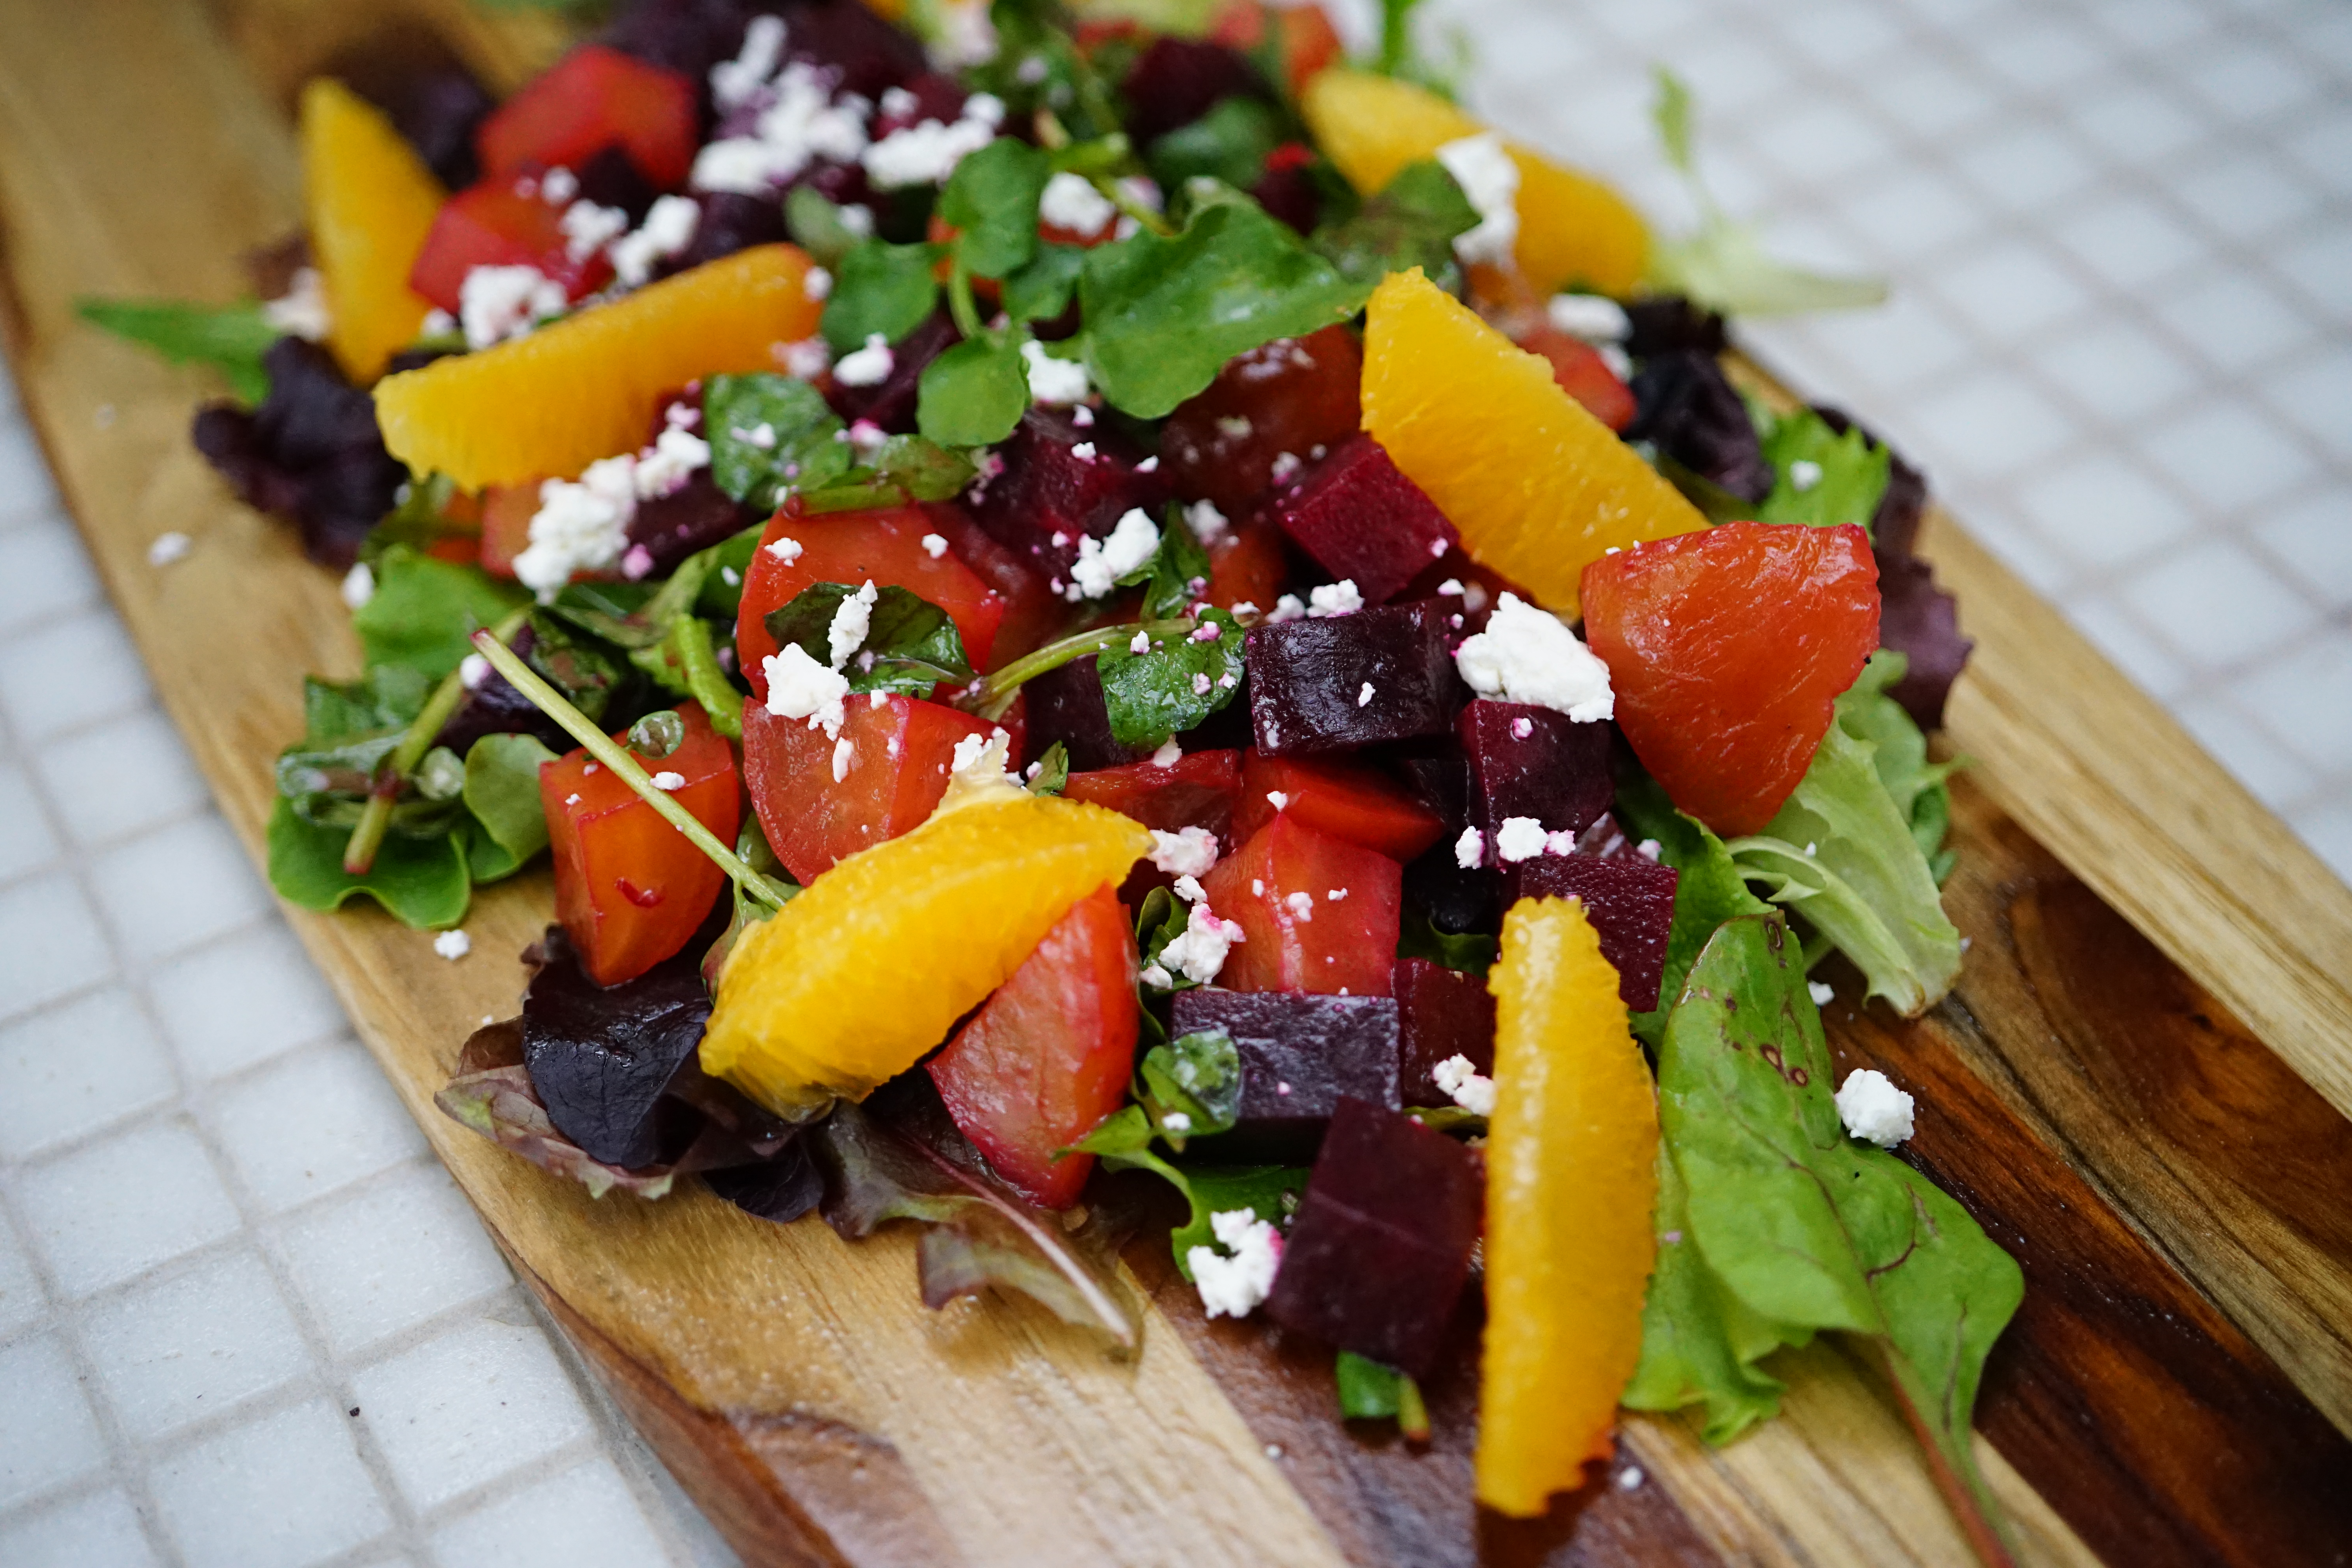 Danny Lledo's beetroot and goat cheese salad